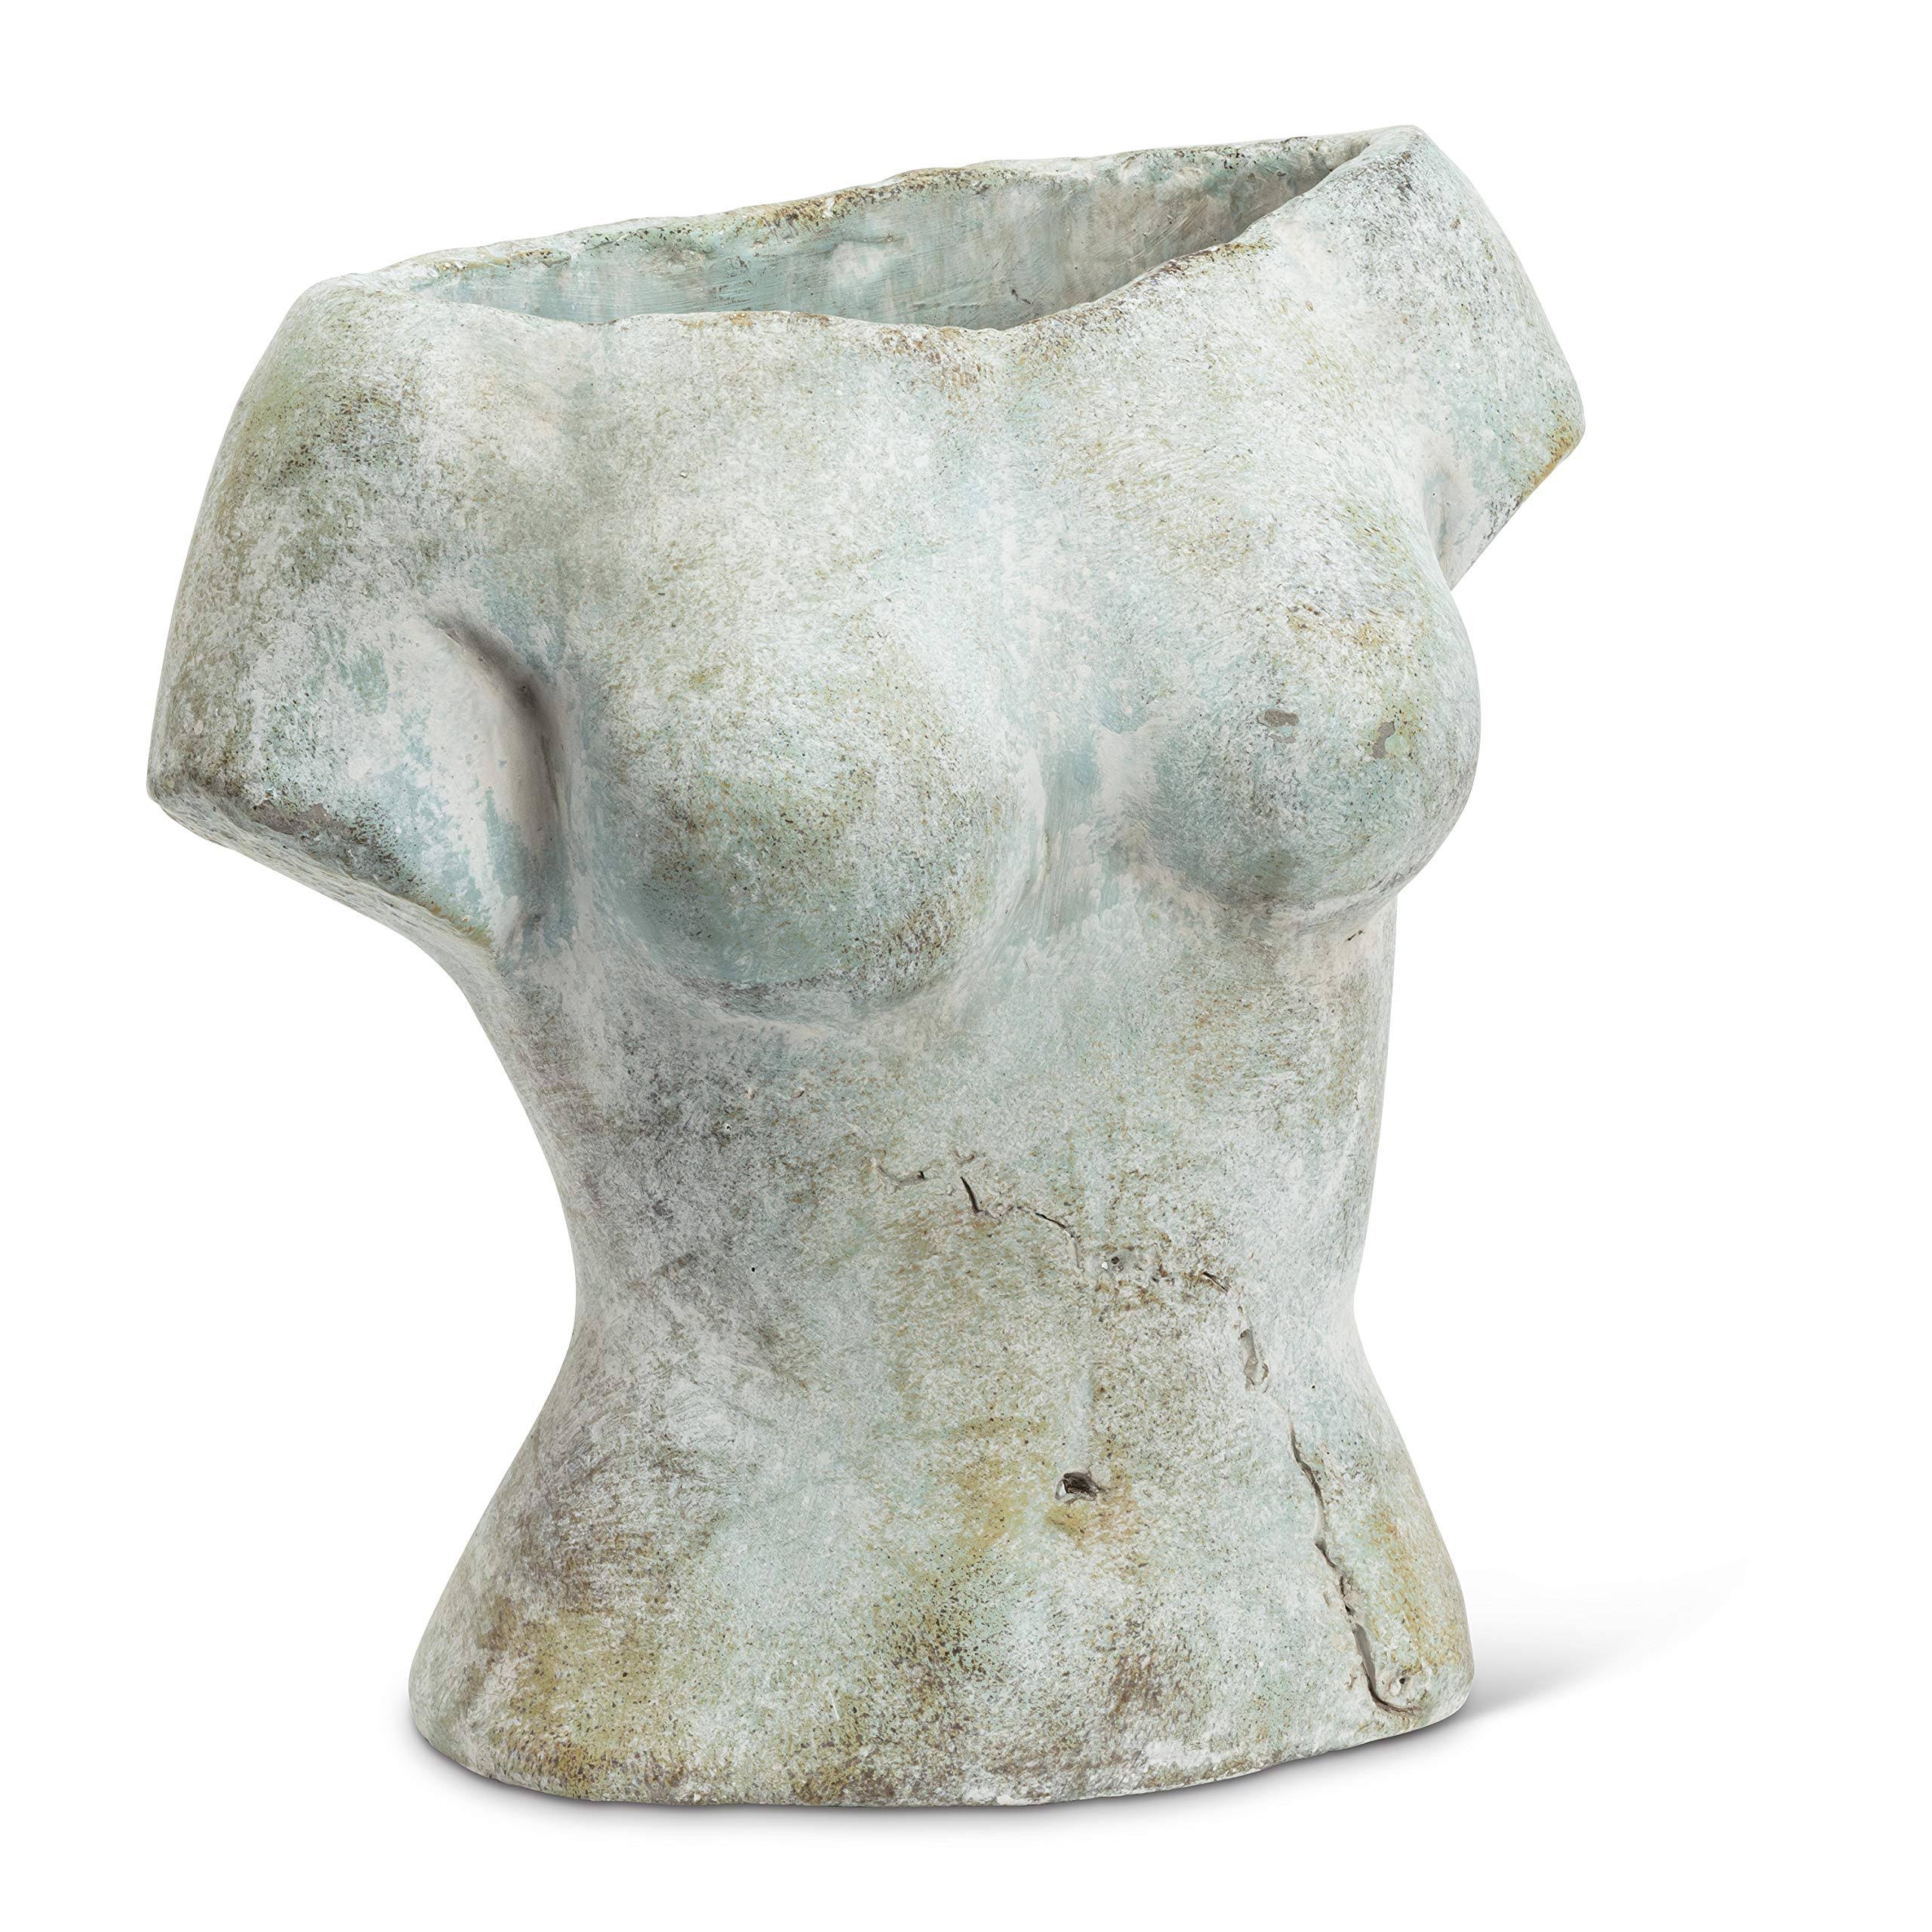 Abbott Collections AB-27-ATHENS-800 9 in. Female Torso Planter Grey